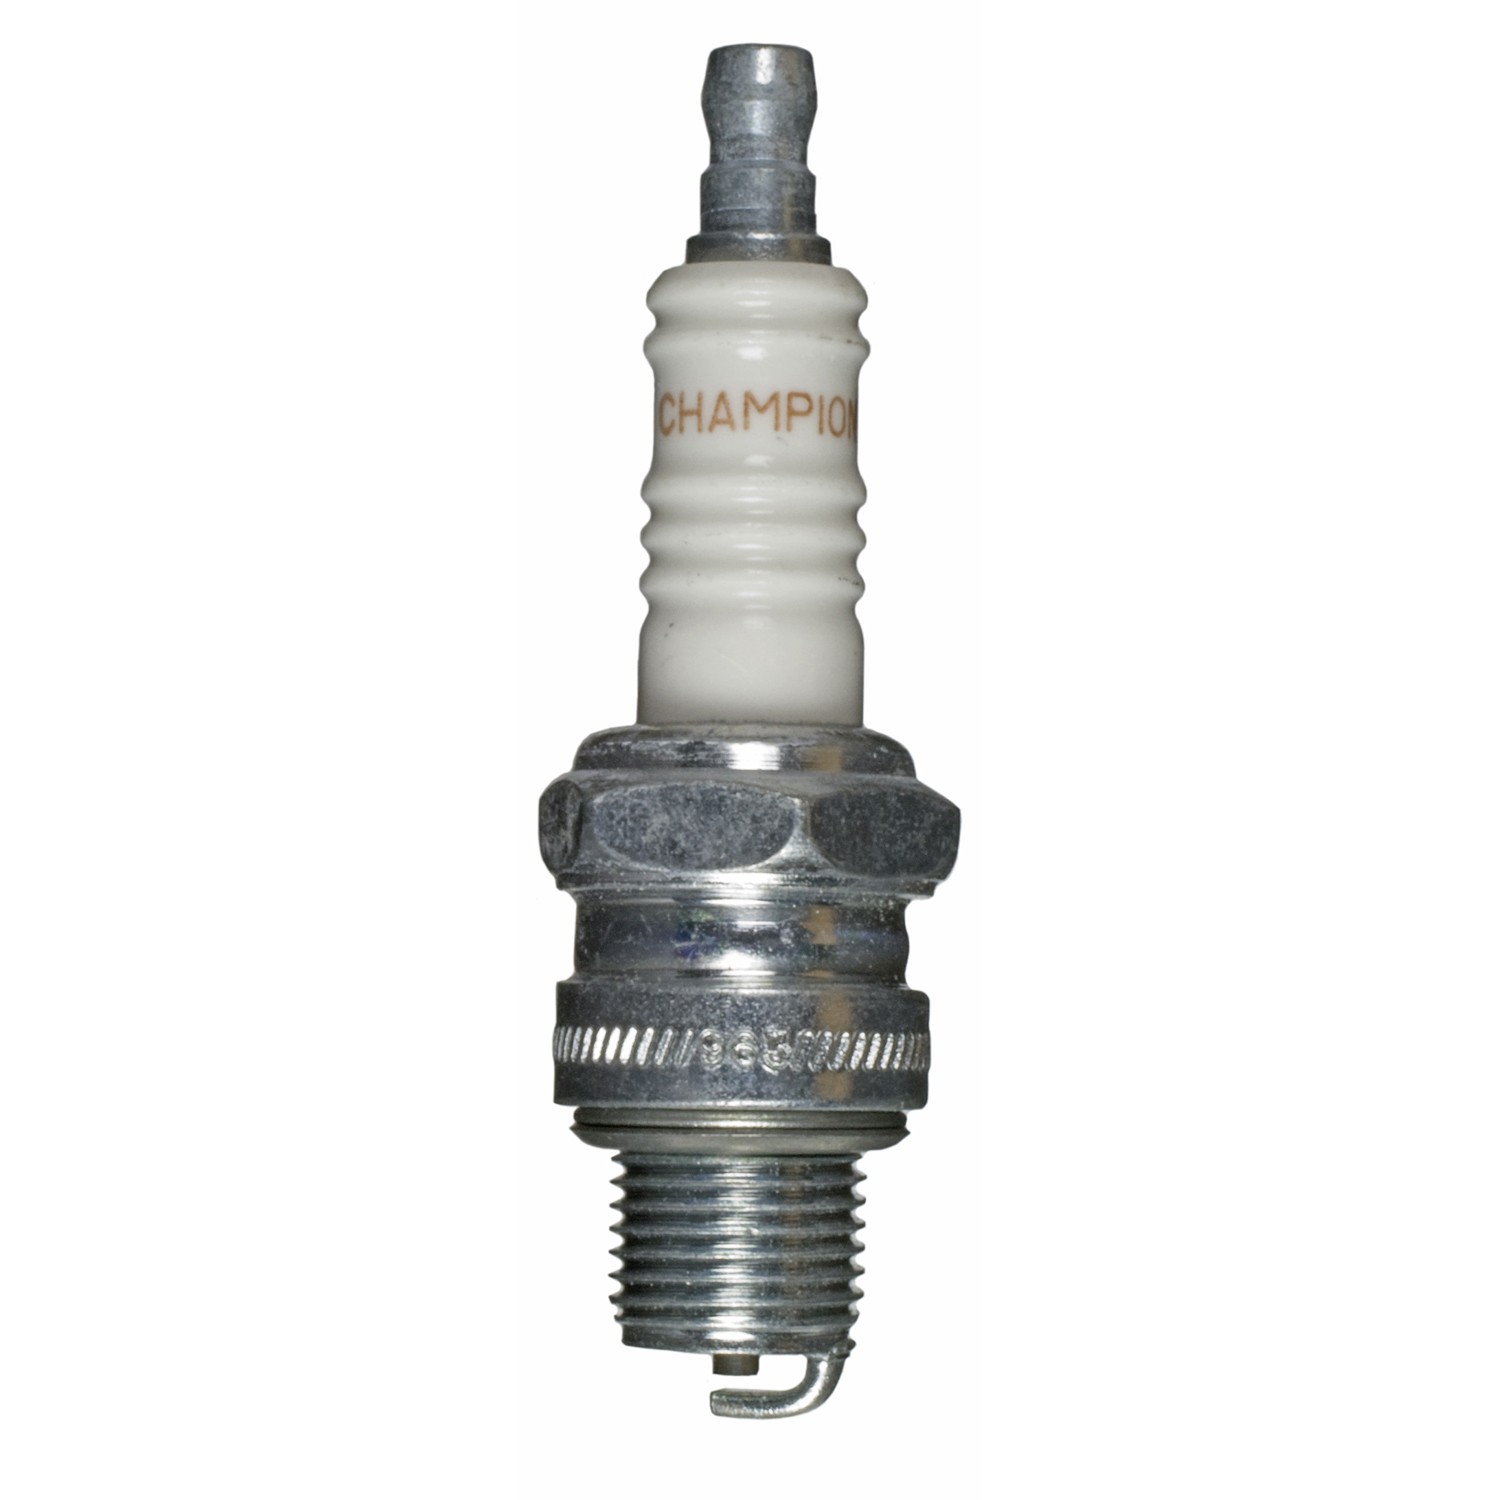 Champion Copper Core Spark Plug, Small Engine Fits select: 1966-1979 VOLKSWAGEN TYPE 1, 1973-1974 VOLKSWAGEN THE THING - image 1 of 5